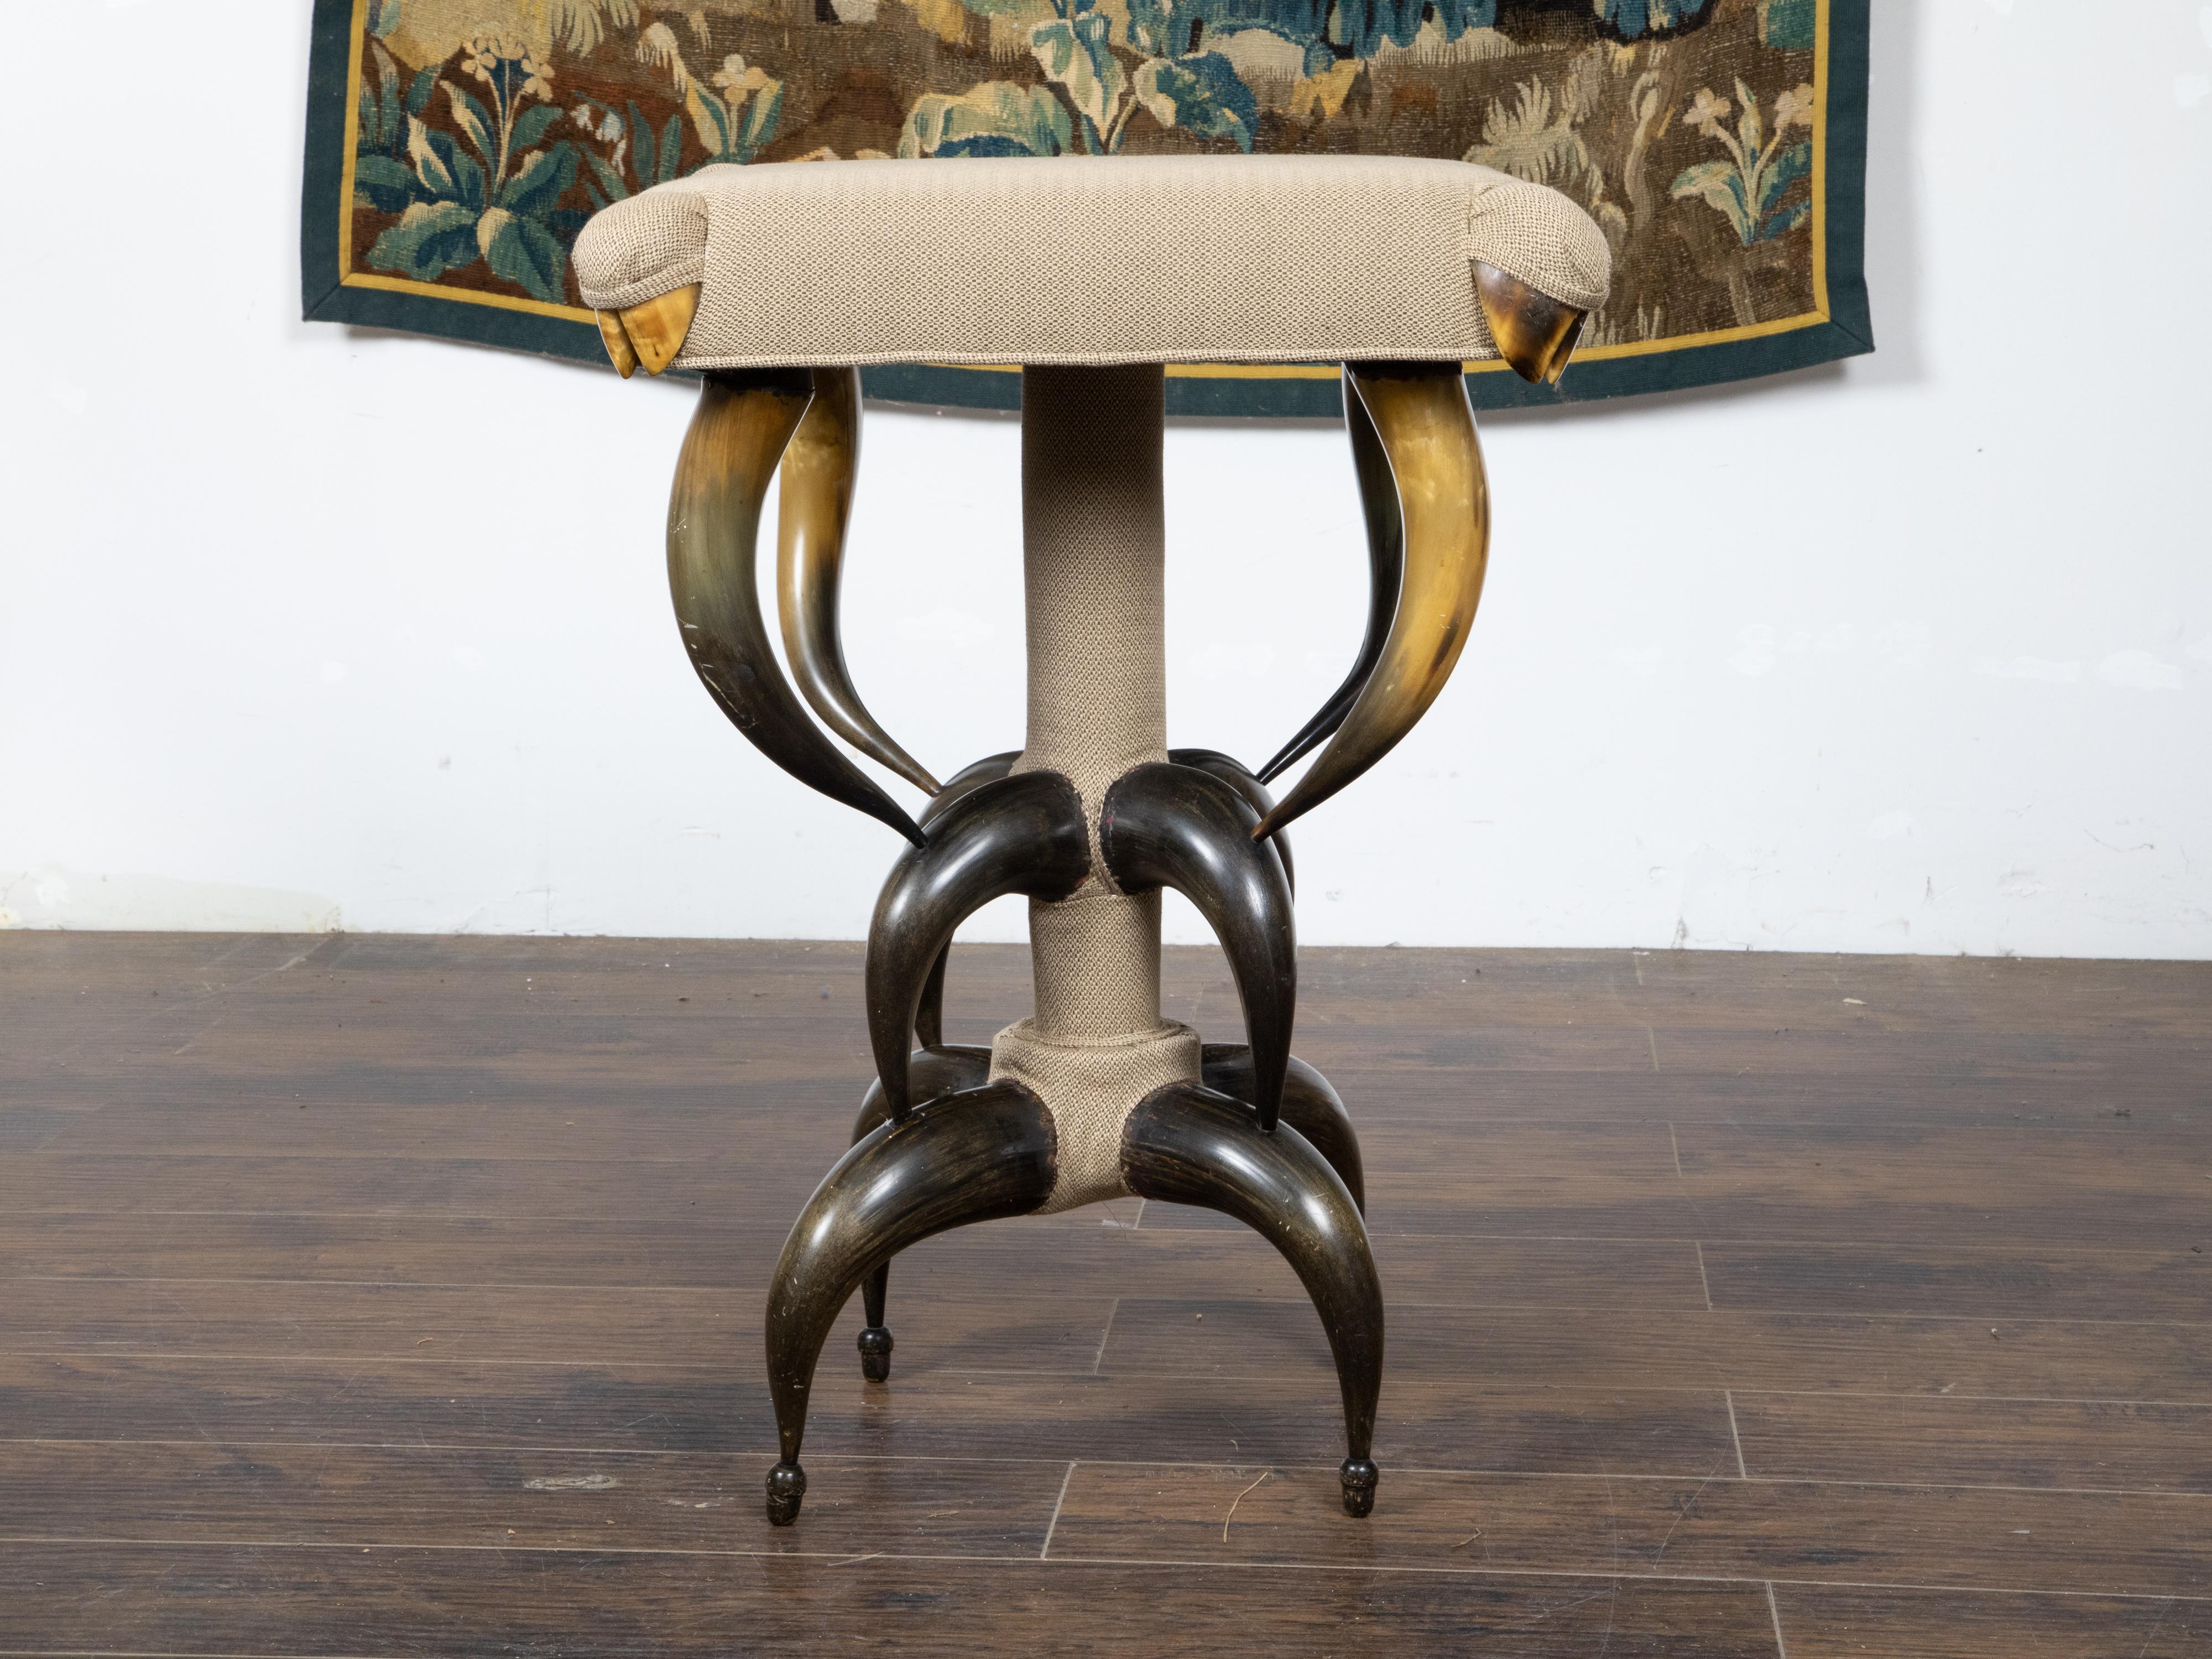 An American horn stool from circa 1880 with custom upholstery. This circa 1880 American horn stool stands as a remarkable testament to the eclectic design trends of the period, showcasing a unique three-tiered construction of meticulously arranged